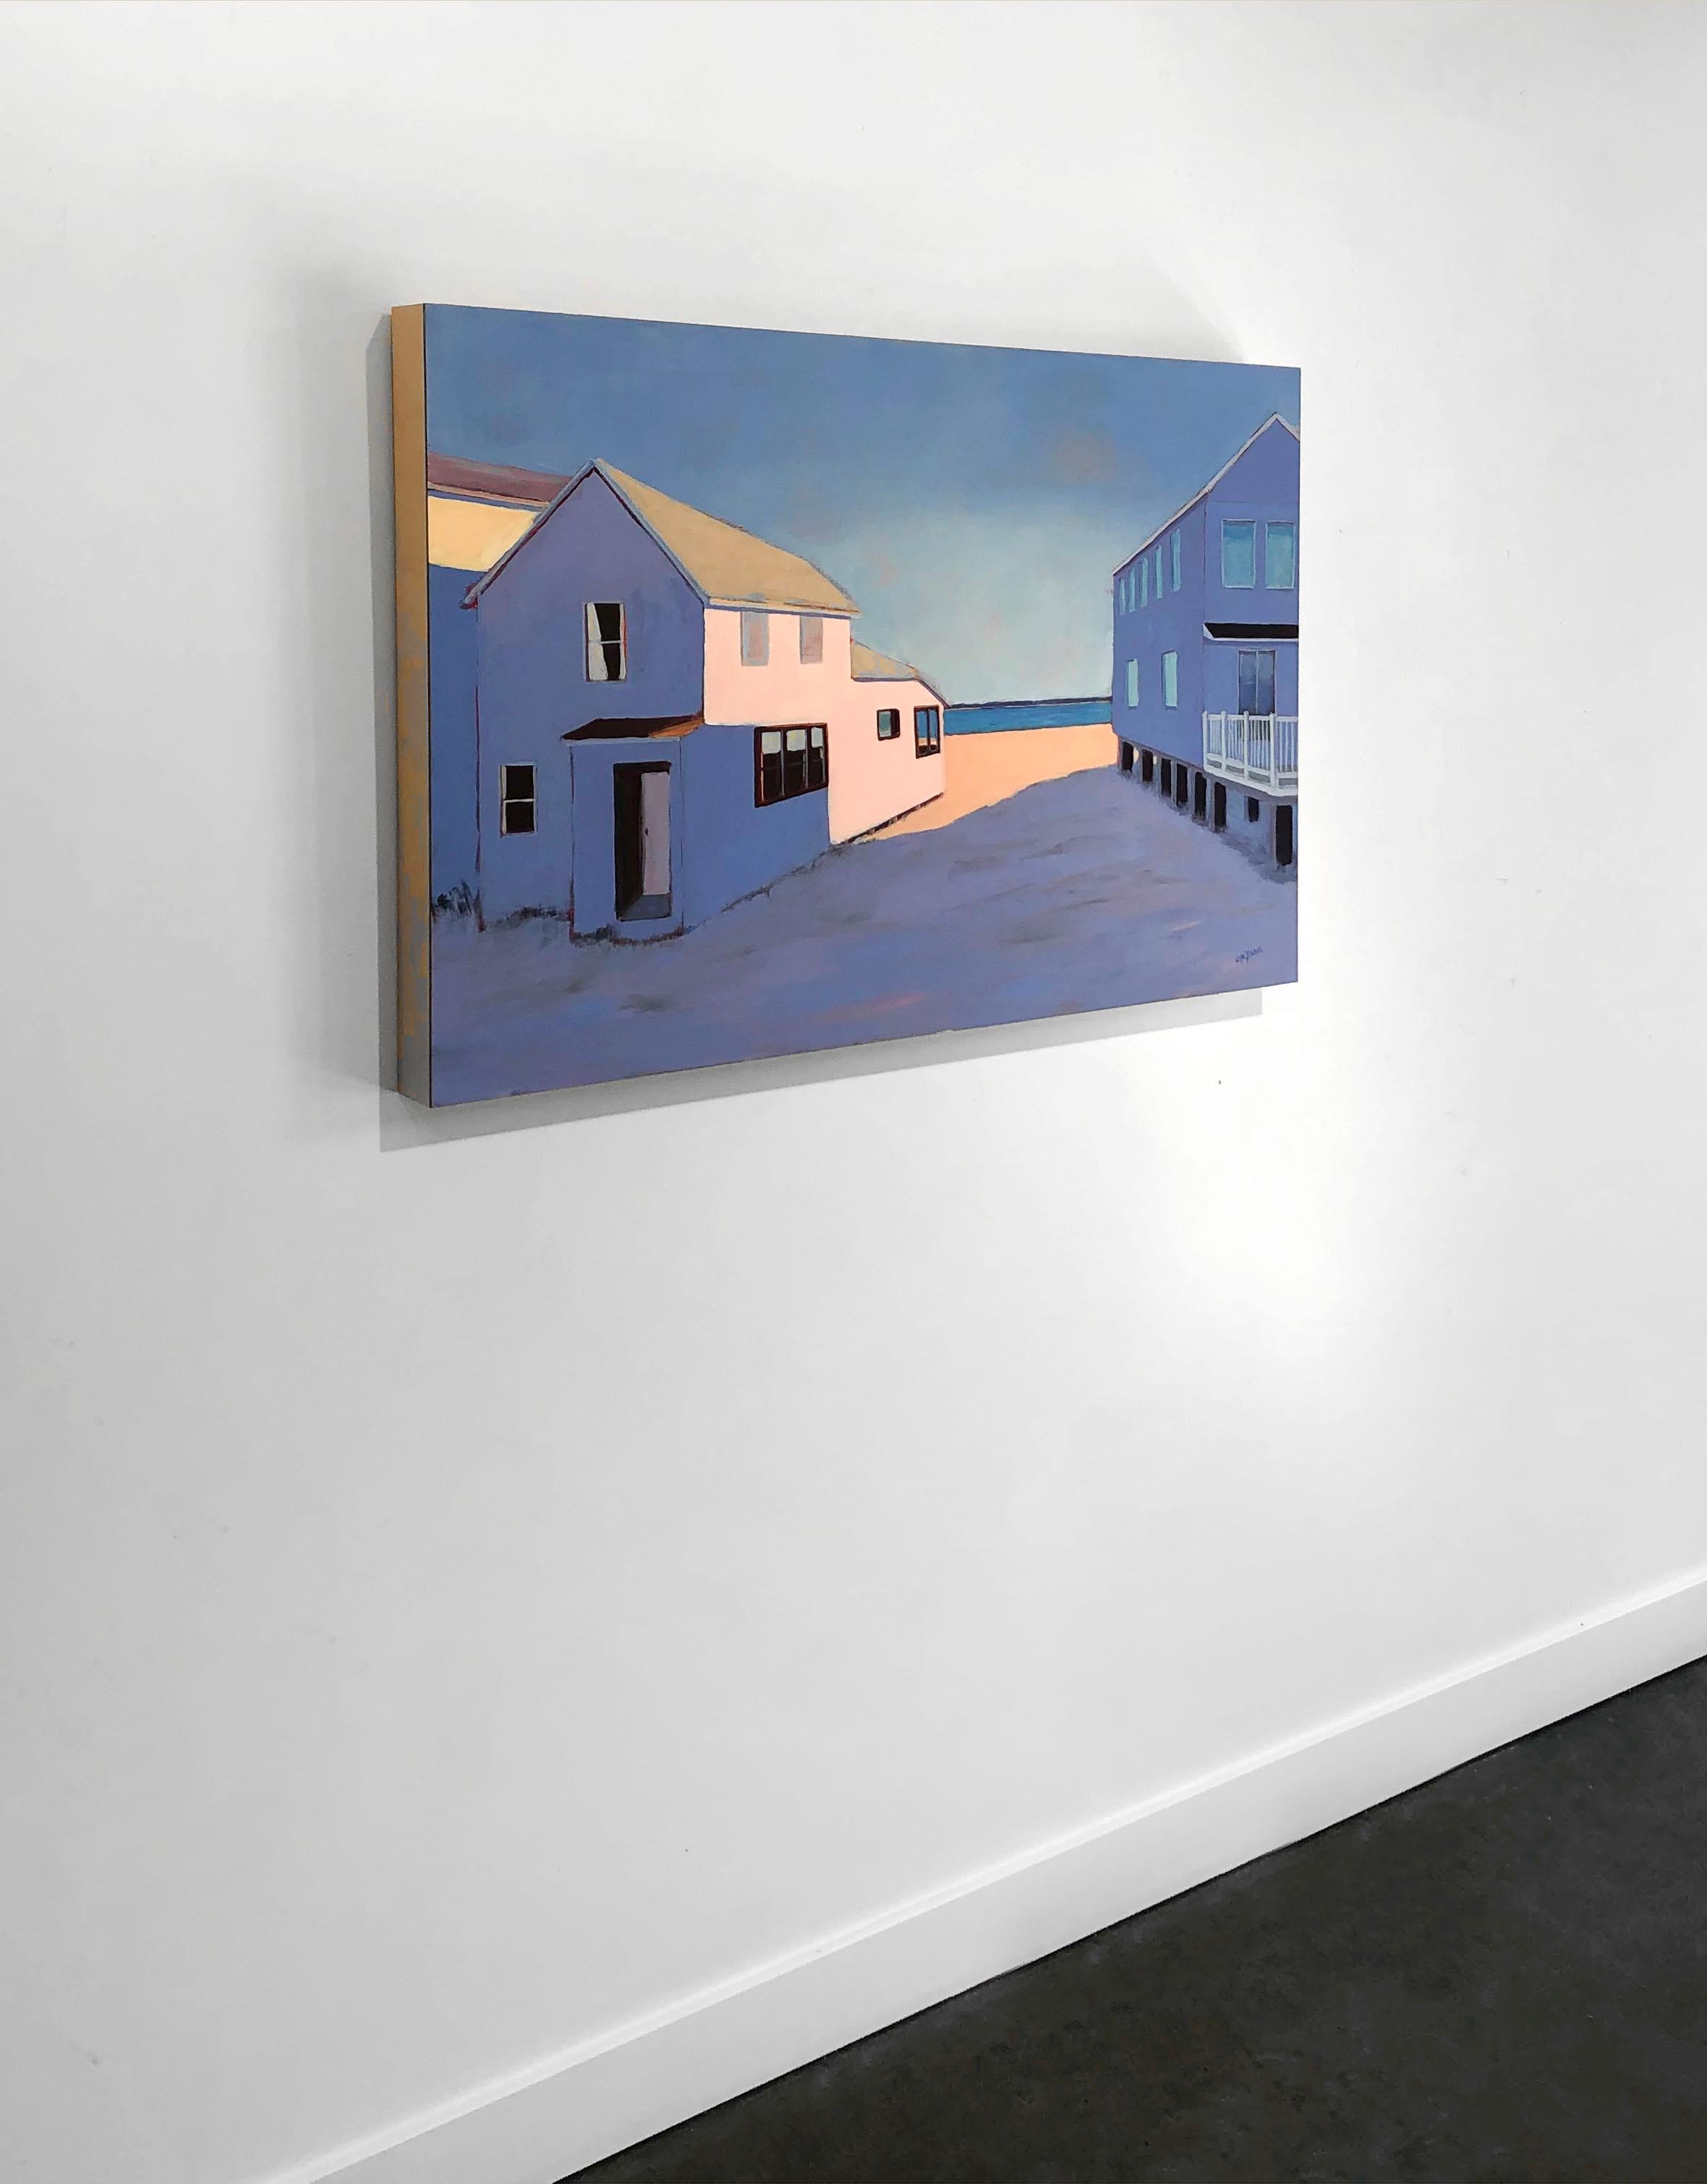 This contemporary landscape painting by Carol Young depicts two beach house-like buildings, with a sandy walkway in between that leads to a body of water. The two buildings and most of the sand is in shade, which the artist has rendered as an almost